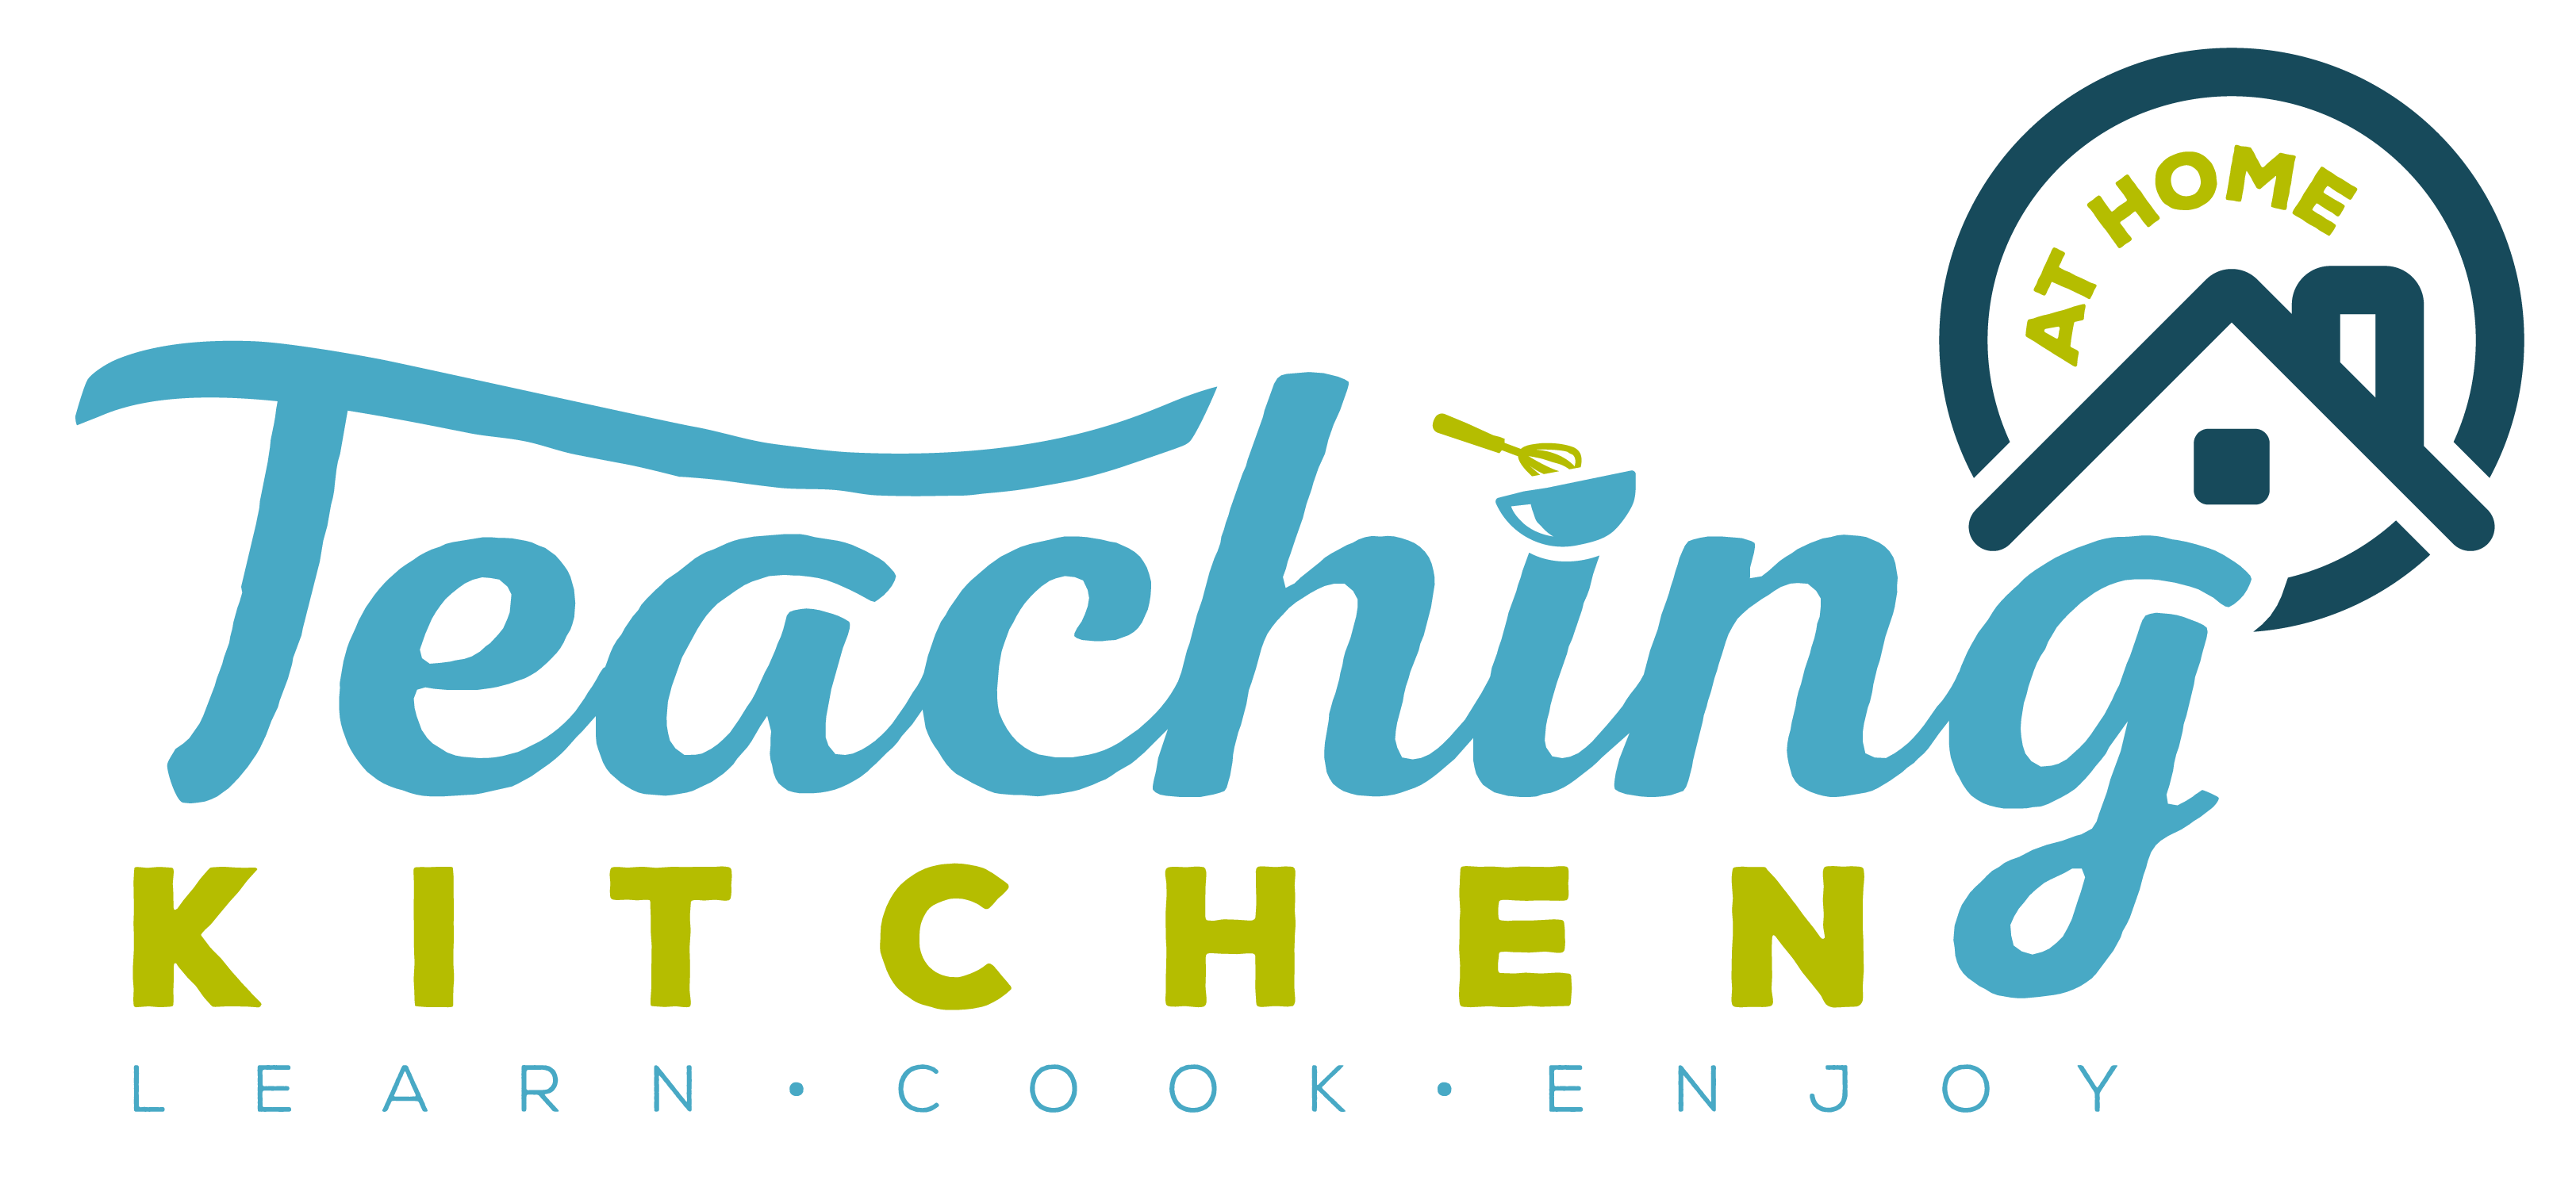 Teaching Kitchen at Home